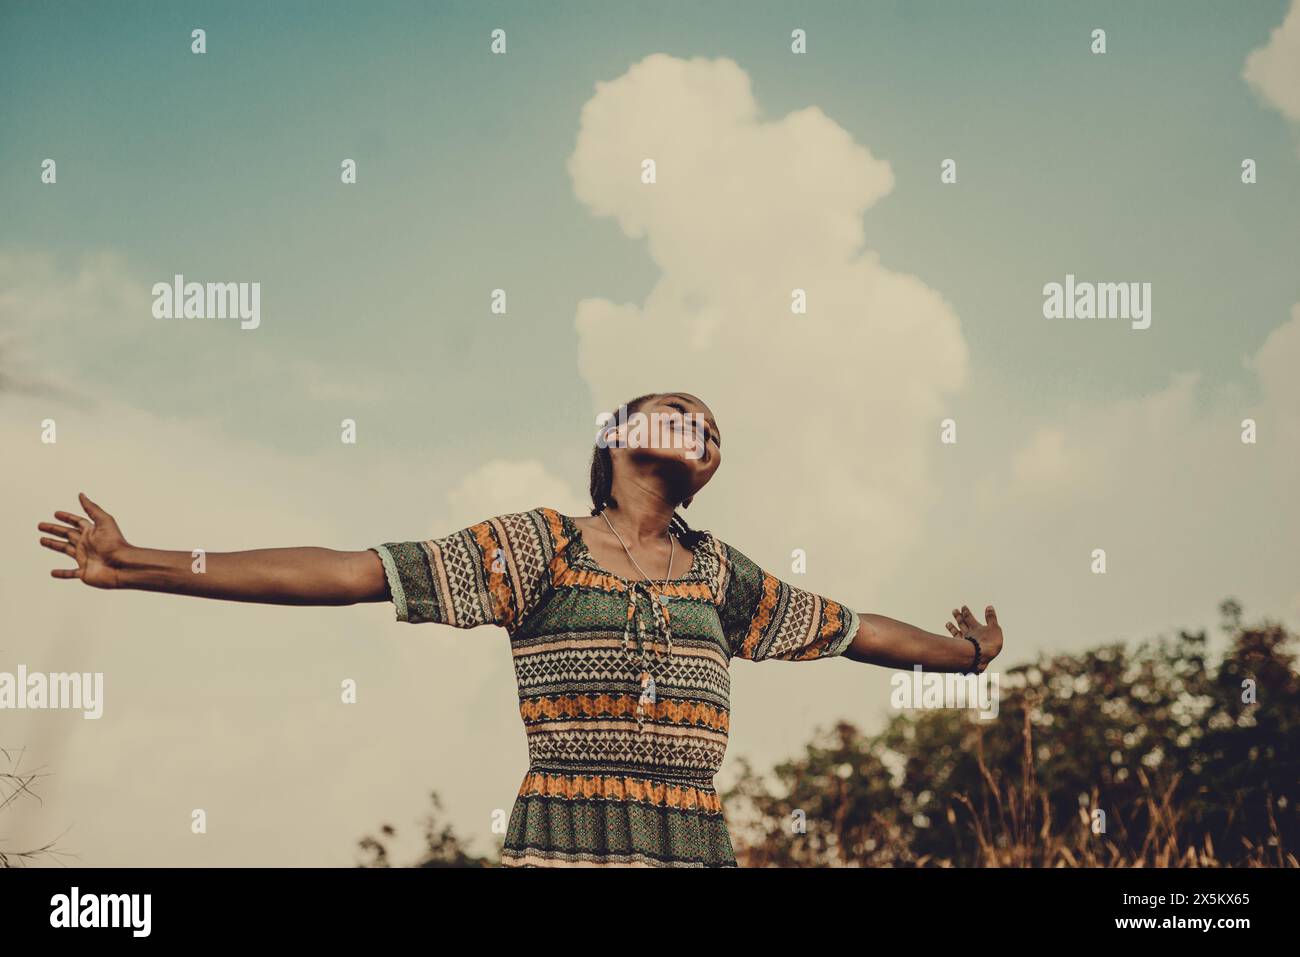 Nigeria, Delta state, Smiling woman with arms outstretched against sky Stock Photo